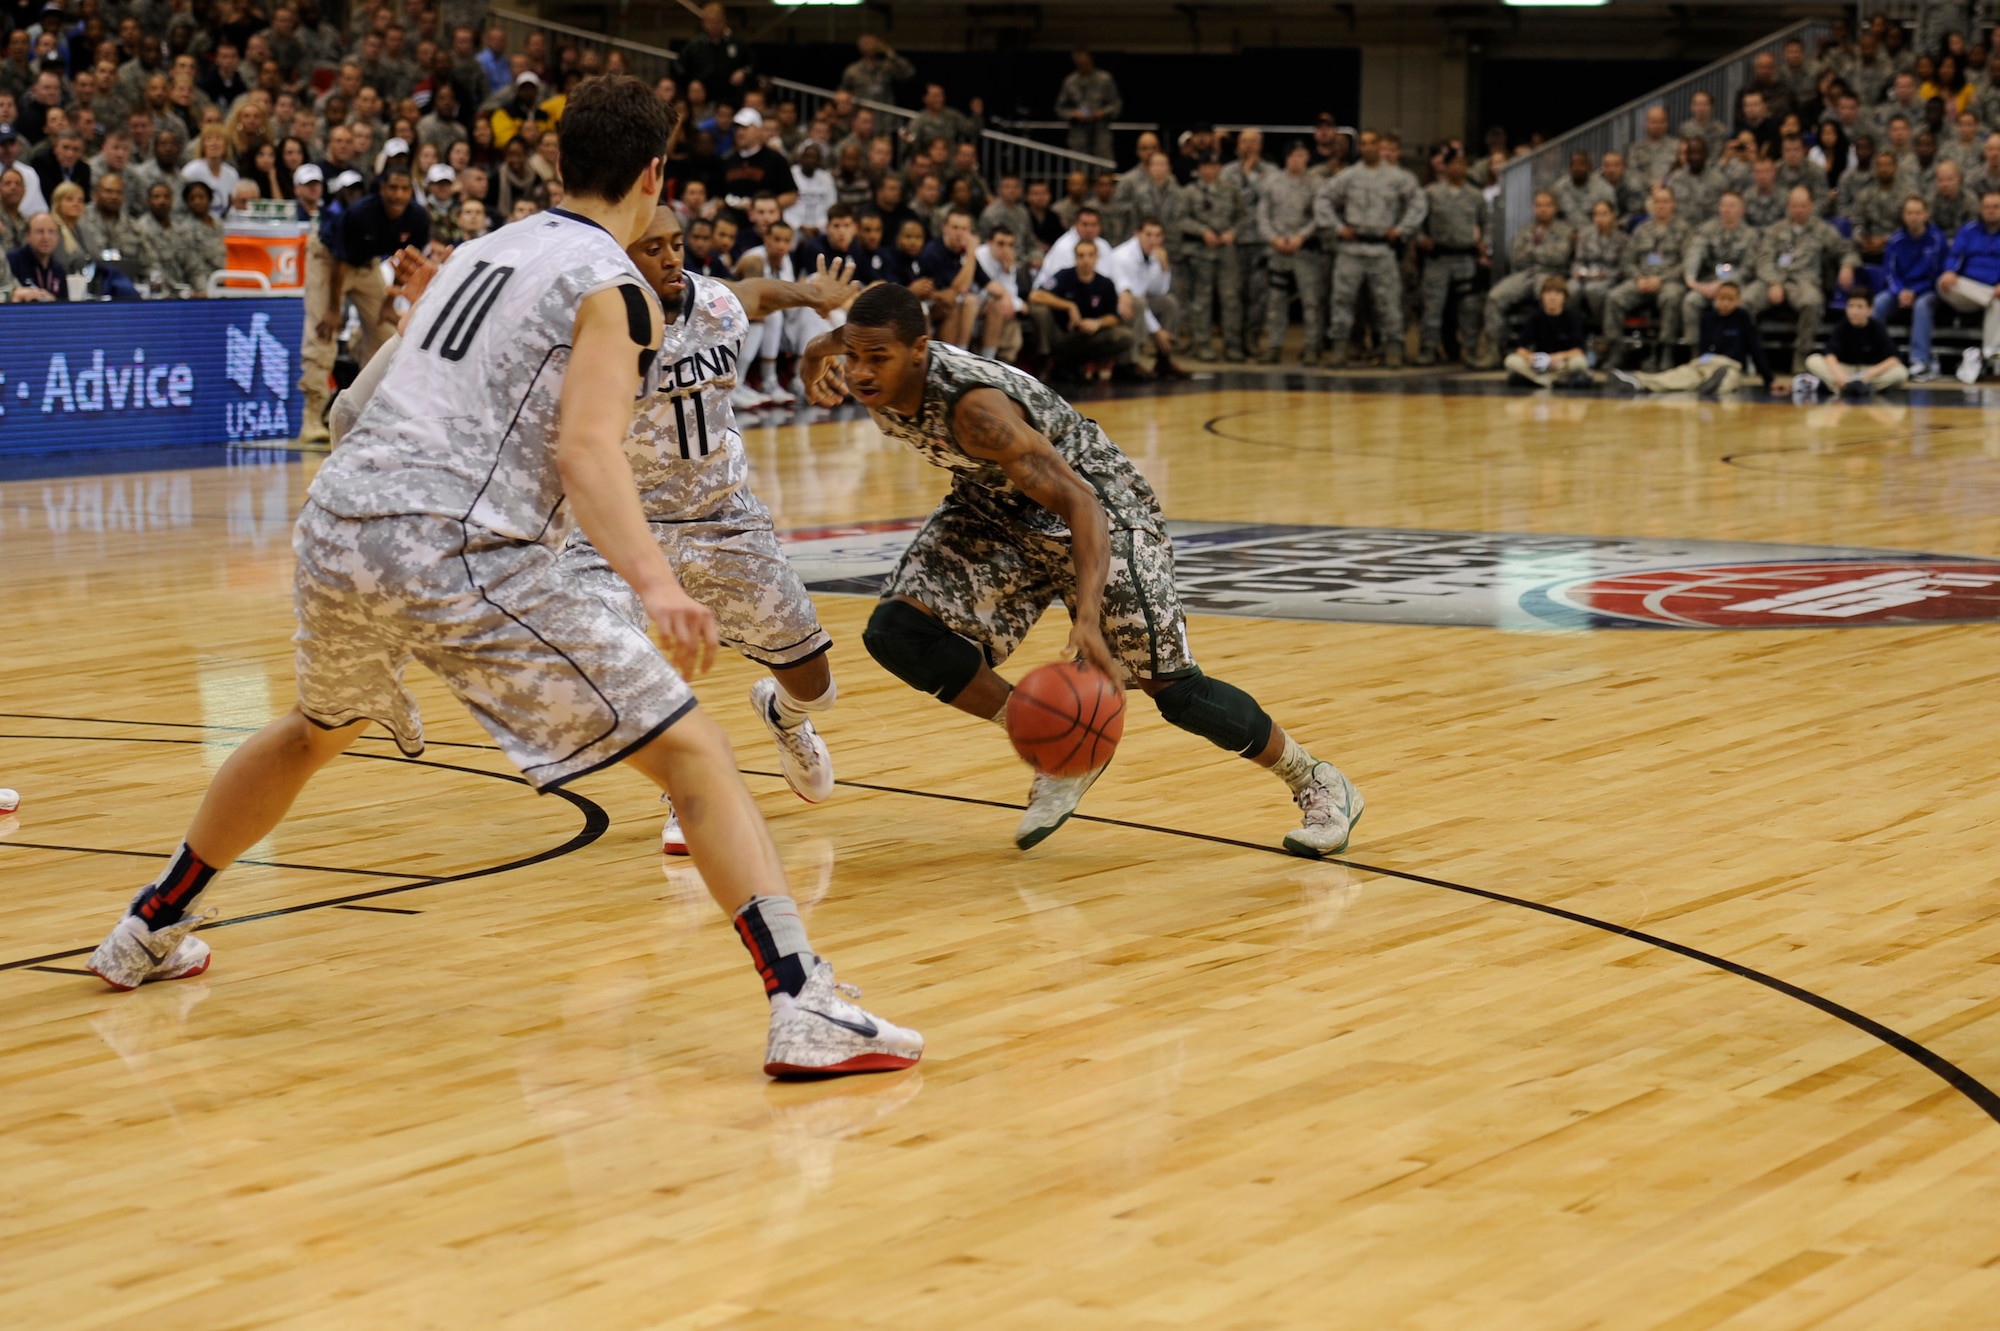 Kieth Appling, Michigan State University point guard, sprints for the hoop during the 2012 Armed Forces Classic on Ramstein Air Base, Germany, Nov. 10, 2012. The match-up between MSU and University of Connecticut is part of ESPN's Veteran's week initiative to honor the men and women who have served and are still serving in the U.S. military. (U.S. Air Force photo/Senior Airman Aaron-Forrest Wainwright)